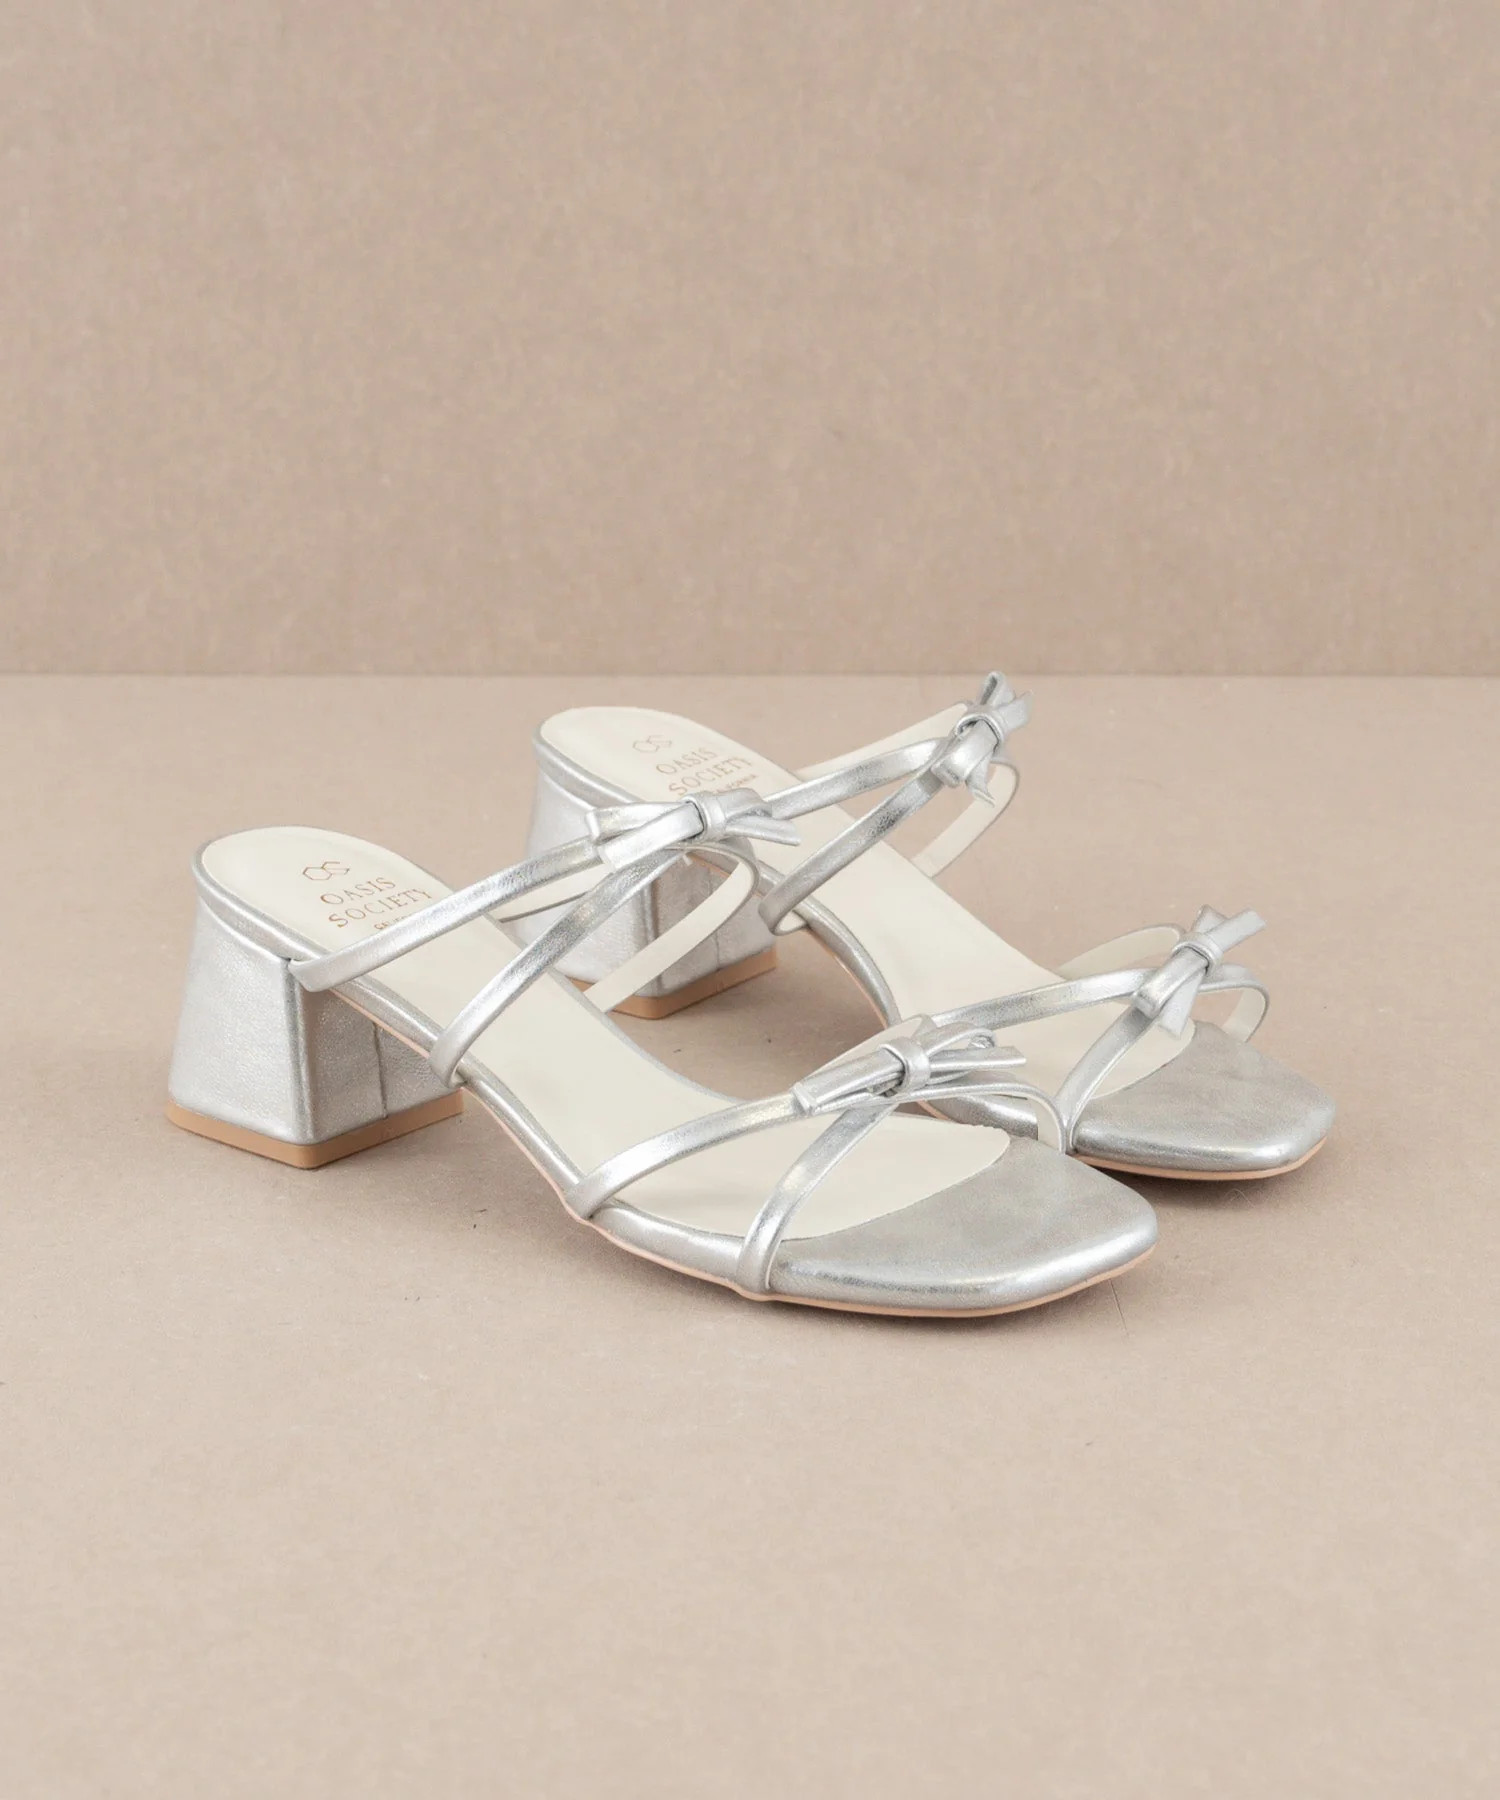 The Maci | Silver Strappy Heel with Bow Details | Oasis Society